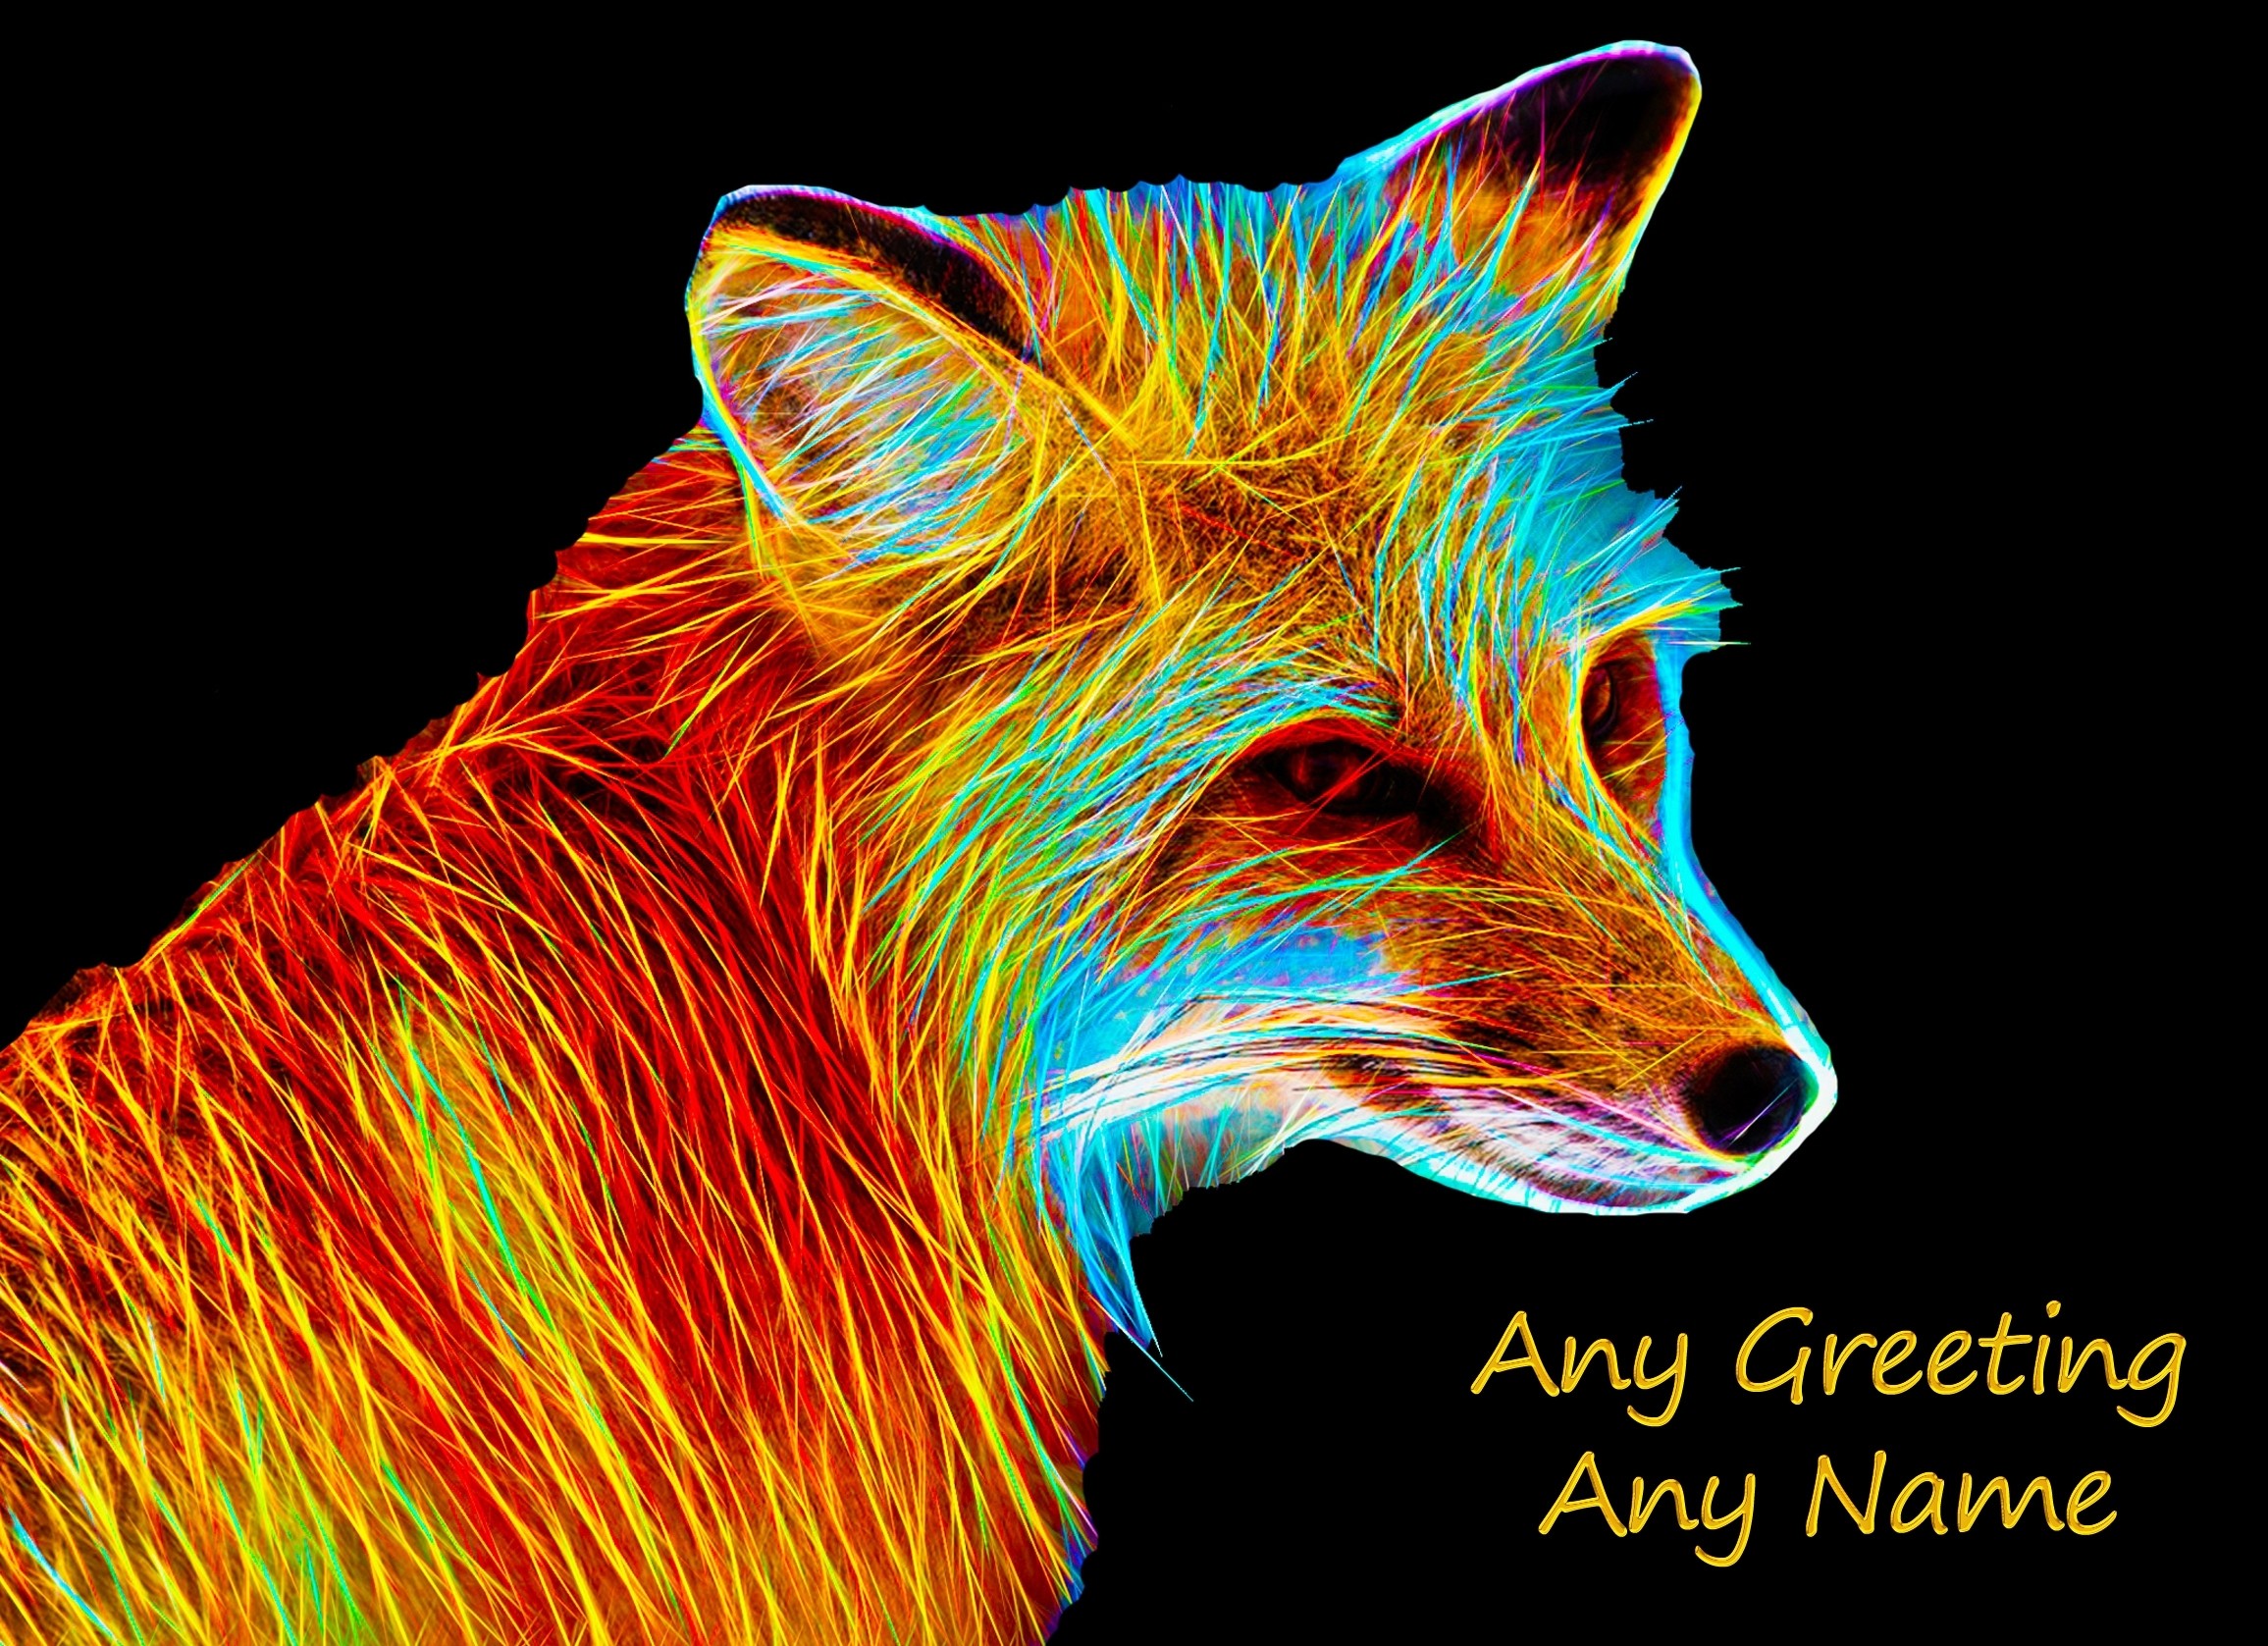 Personalised Fox Neon Art Greeting Card (Birthday, Christmas, Any Occasion)